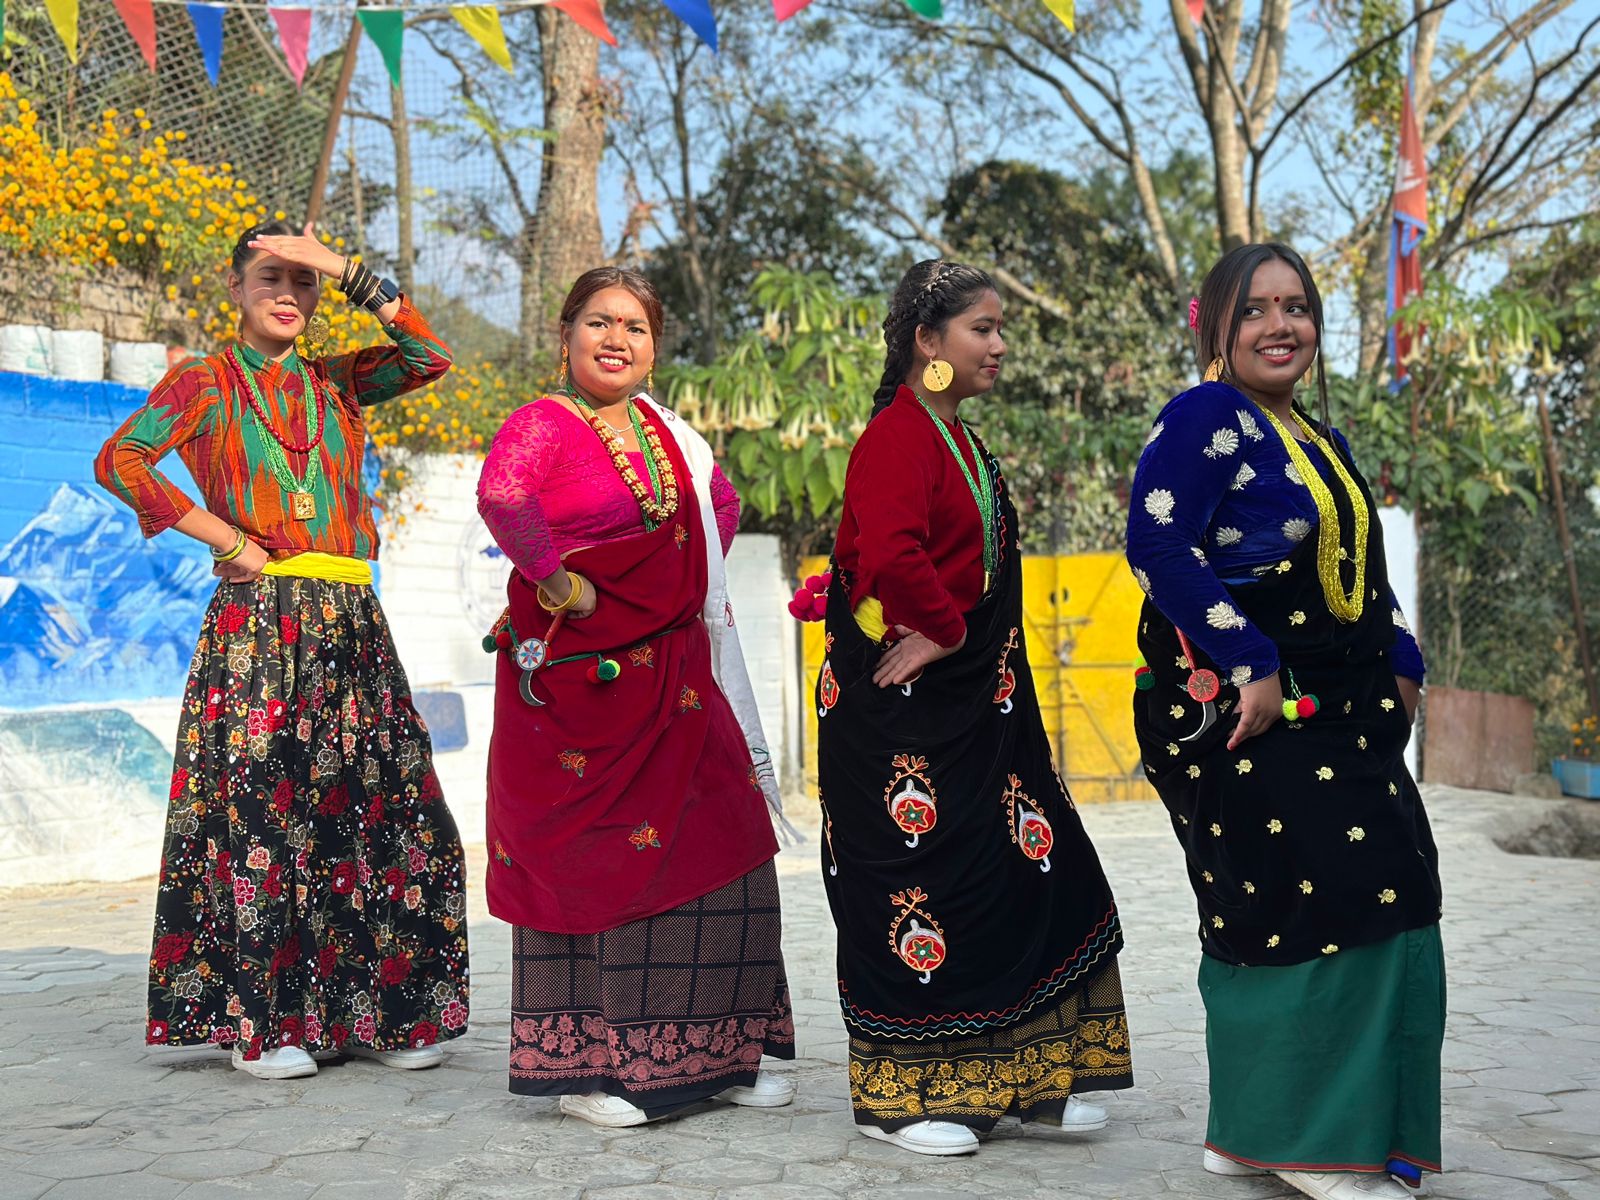 Some of the Nepal orphan girls who are getting older dancing in full dress.